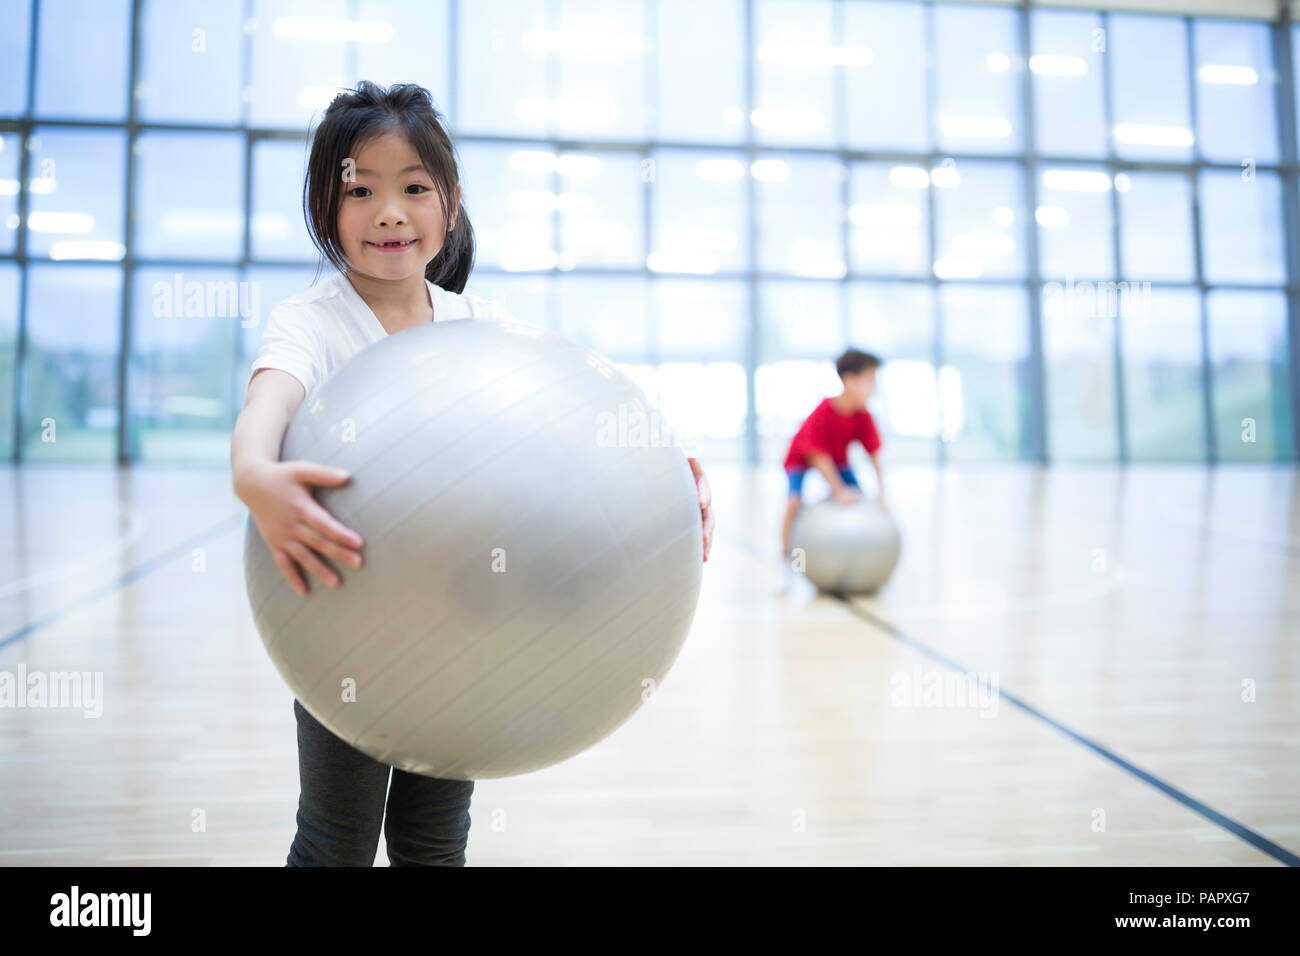 Portrait of smiling schoolgirl holding gym ball in gym class Stock Photo